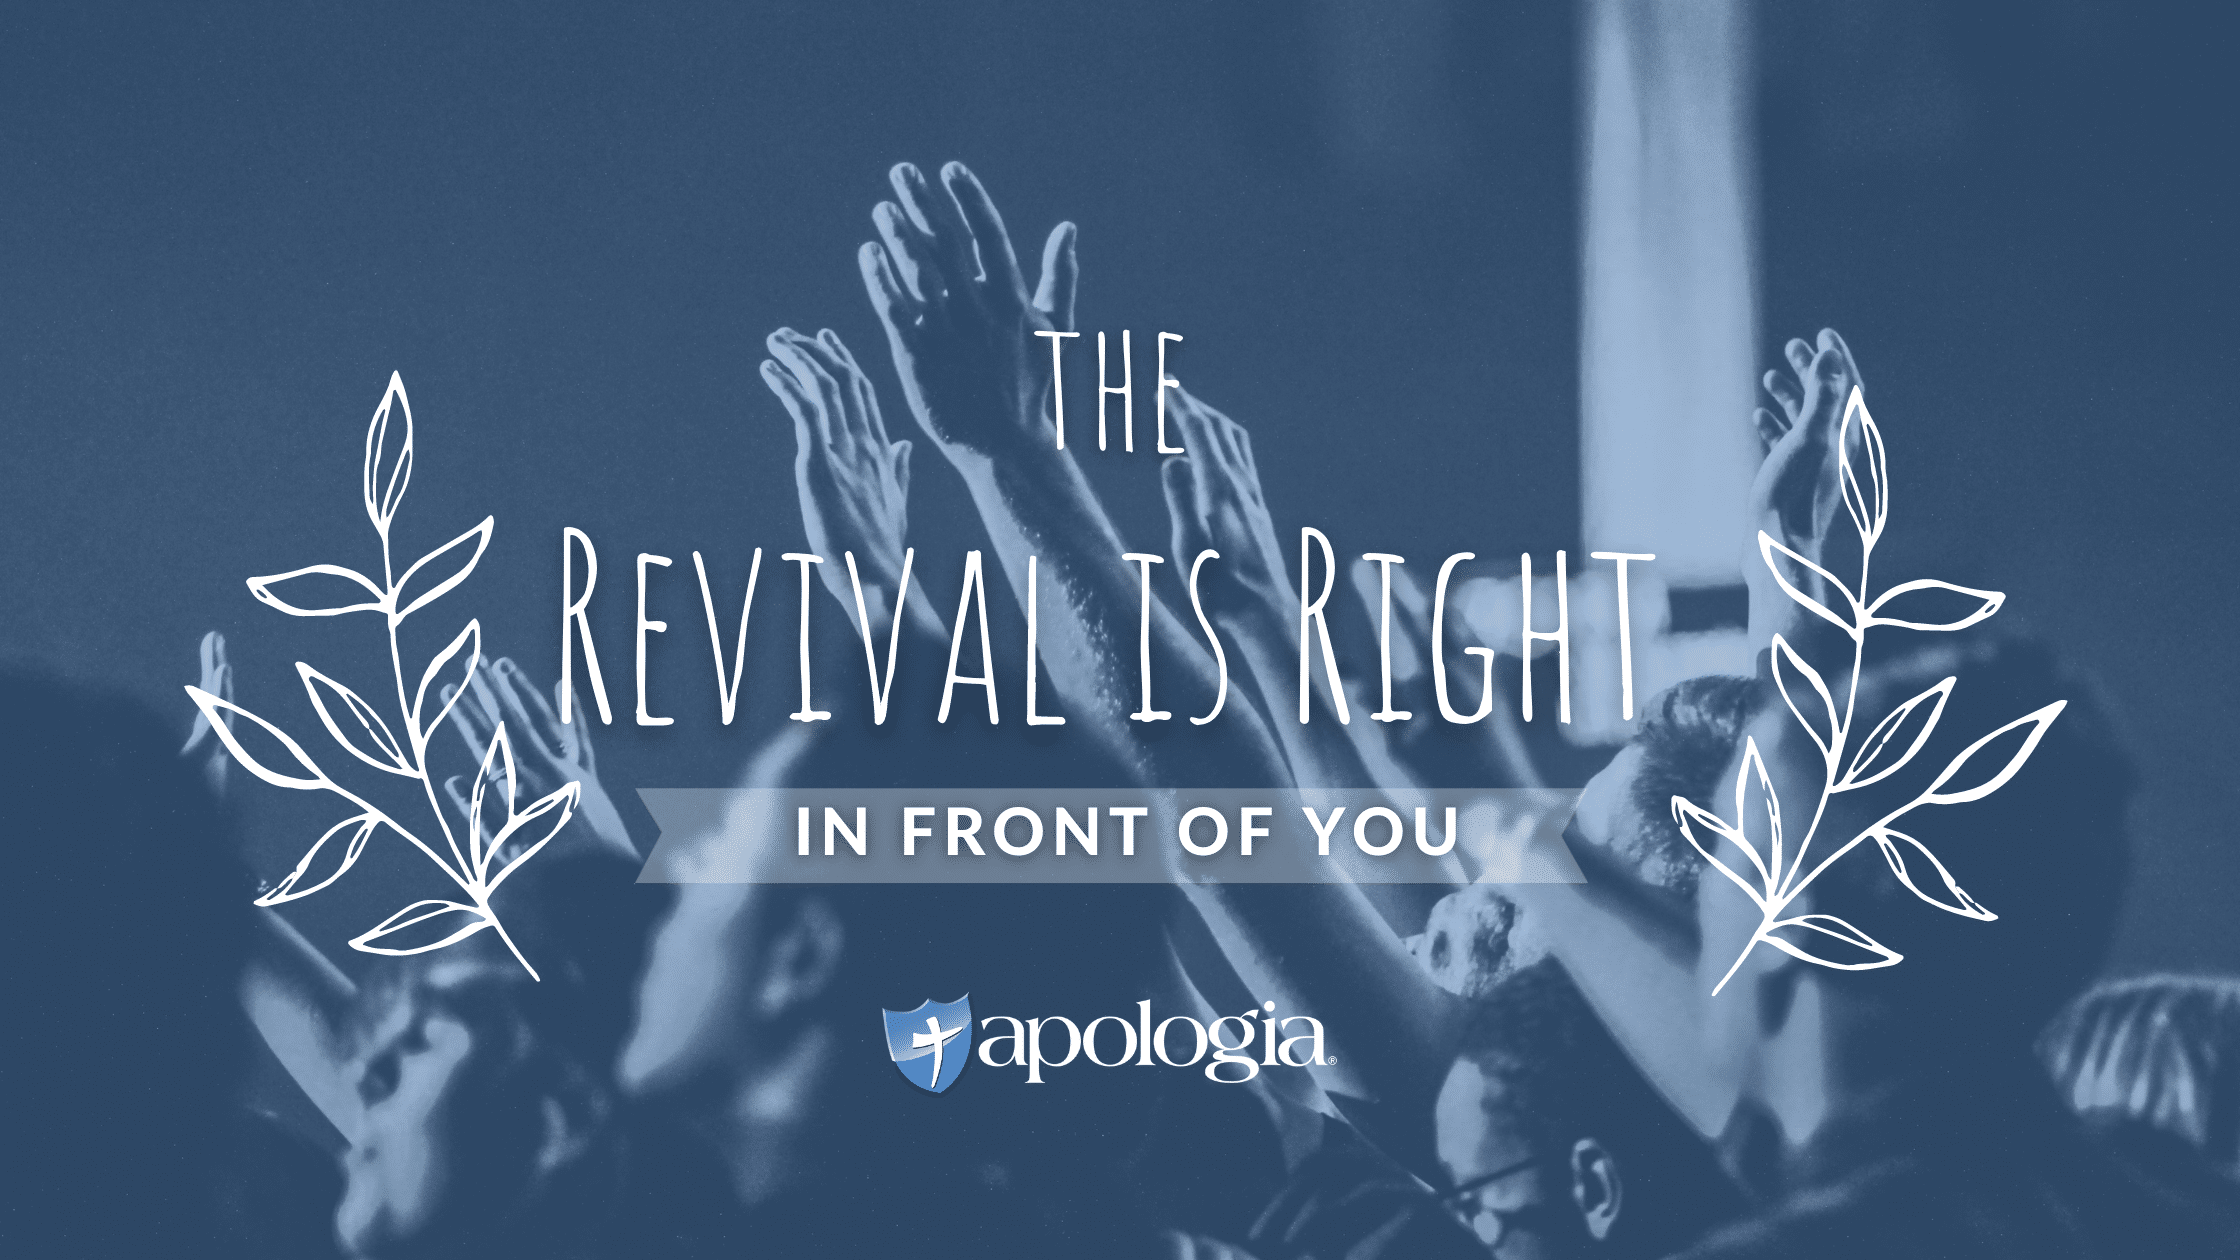 The Revival Right in Front of You